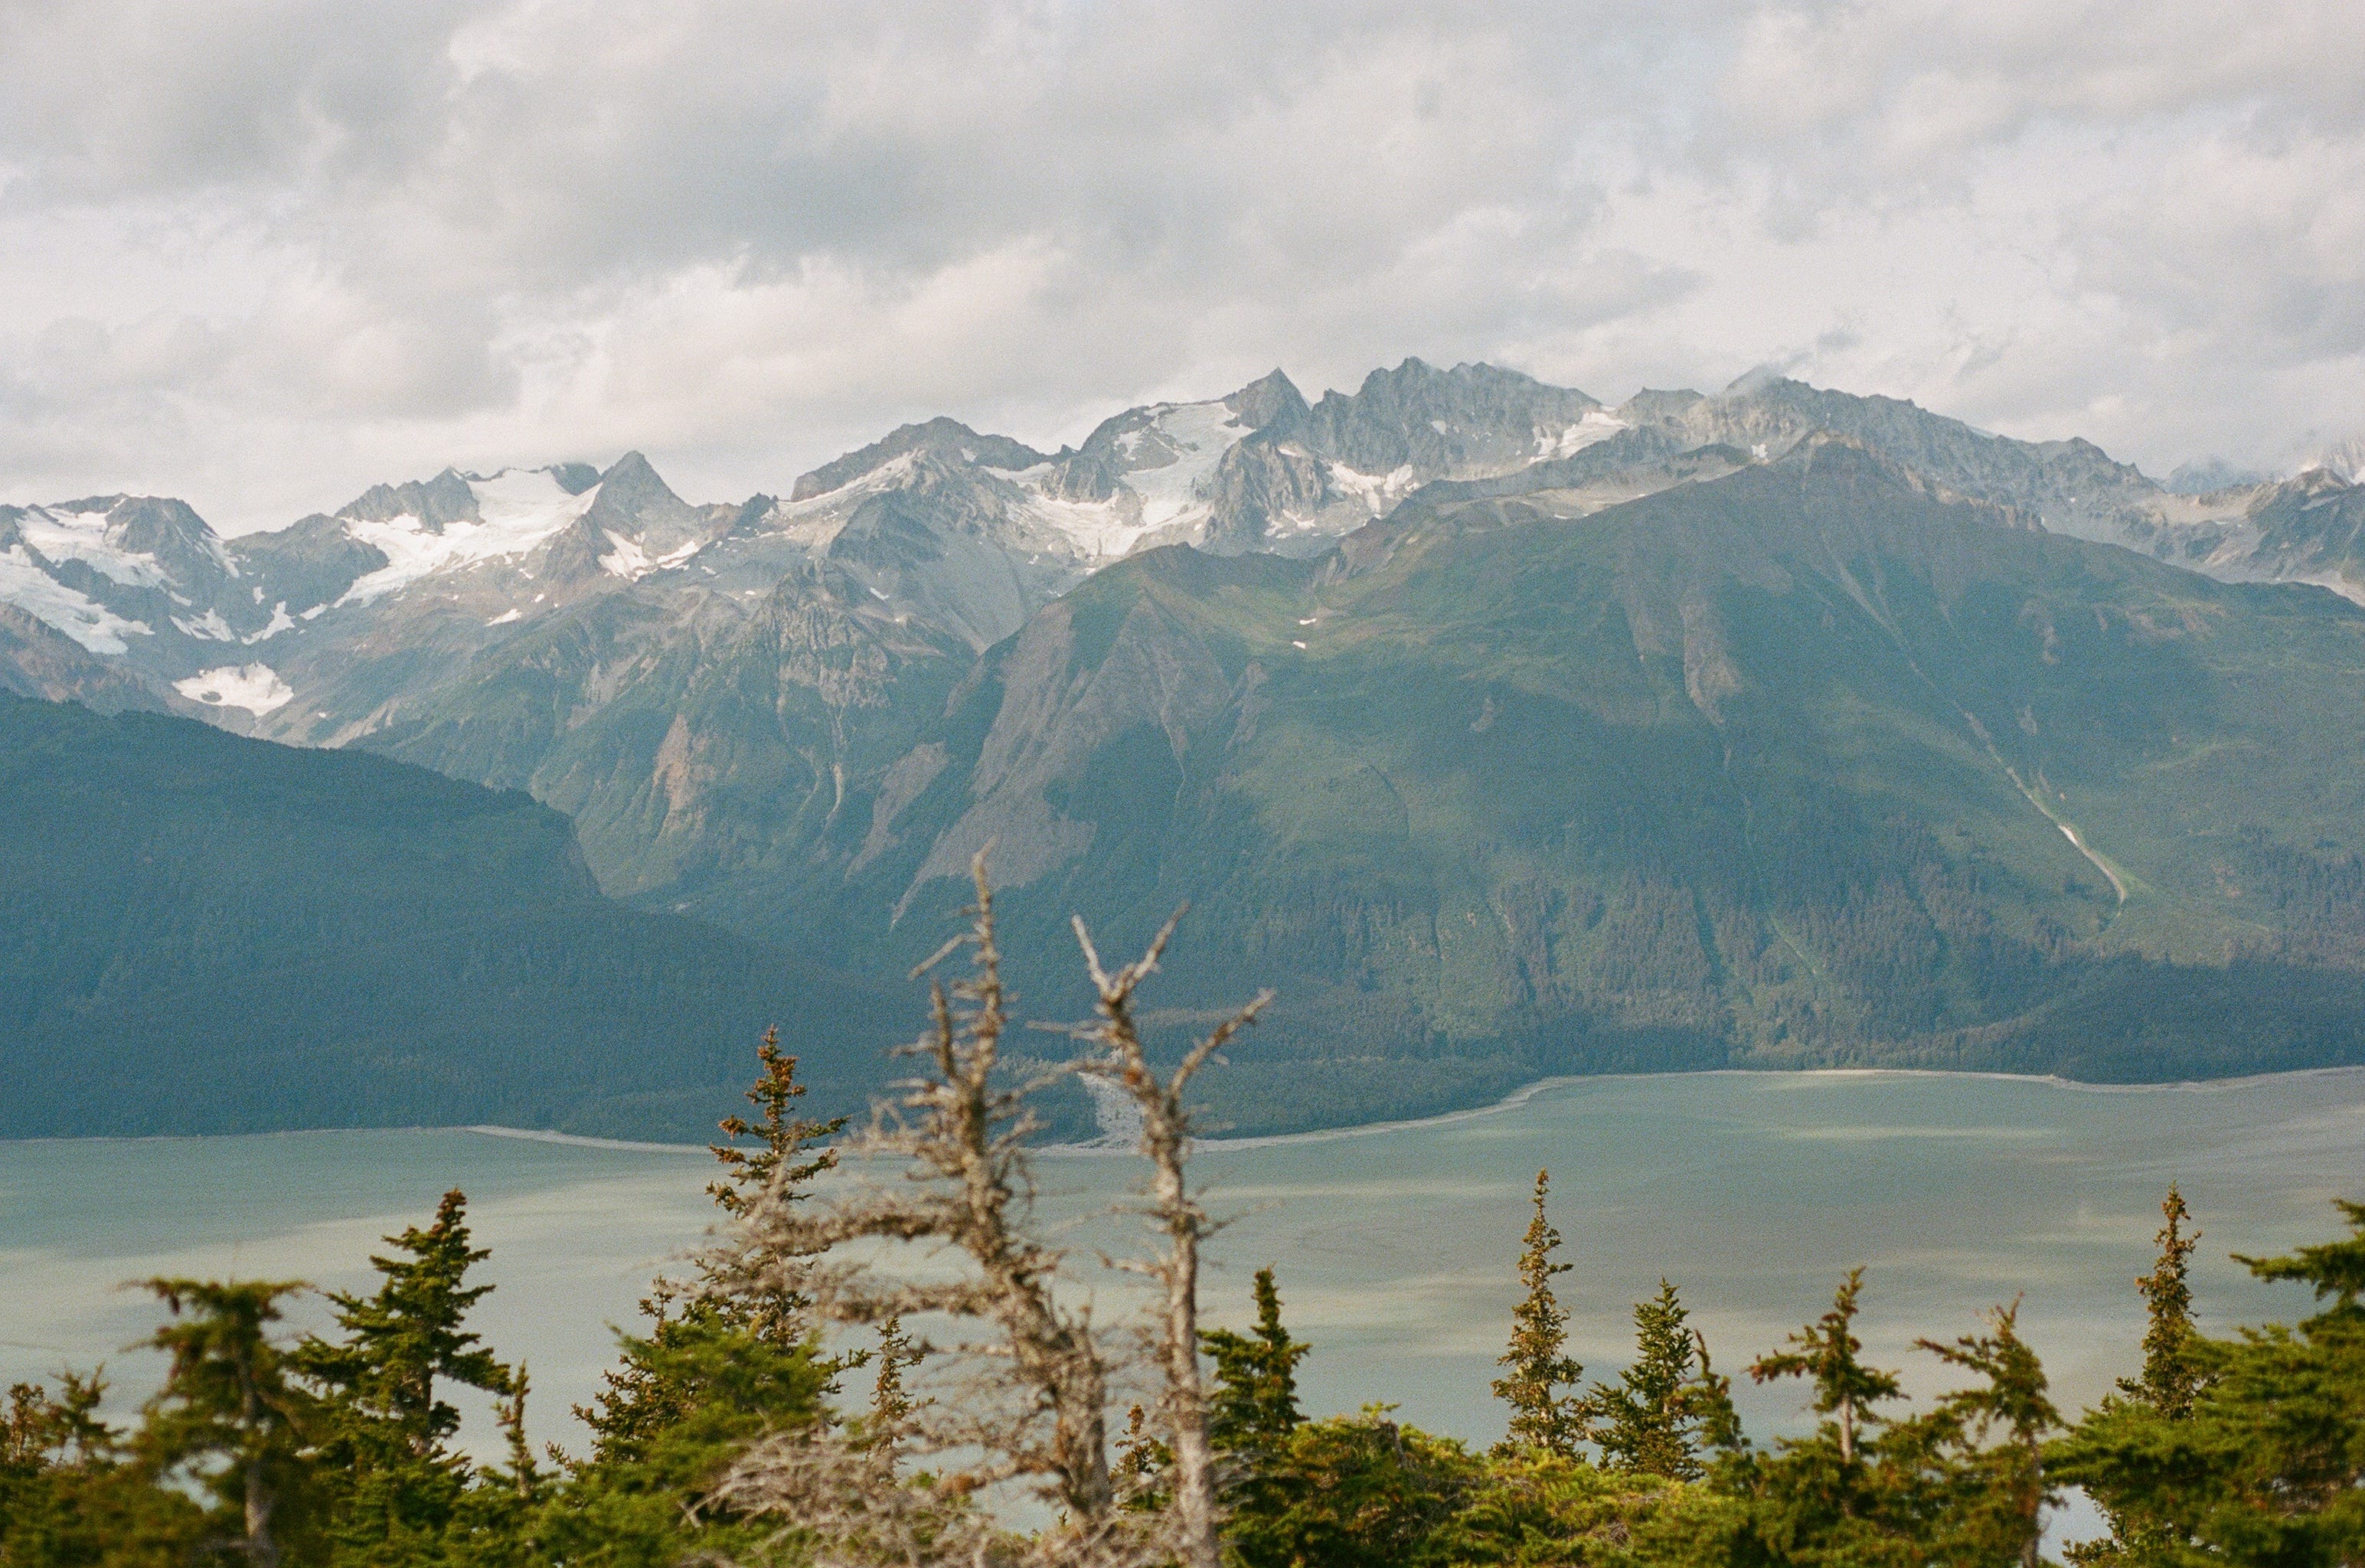 a view of mountains and a tidal river from atop a mountain. coniferous trees can be seen in the foreground.